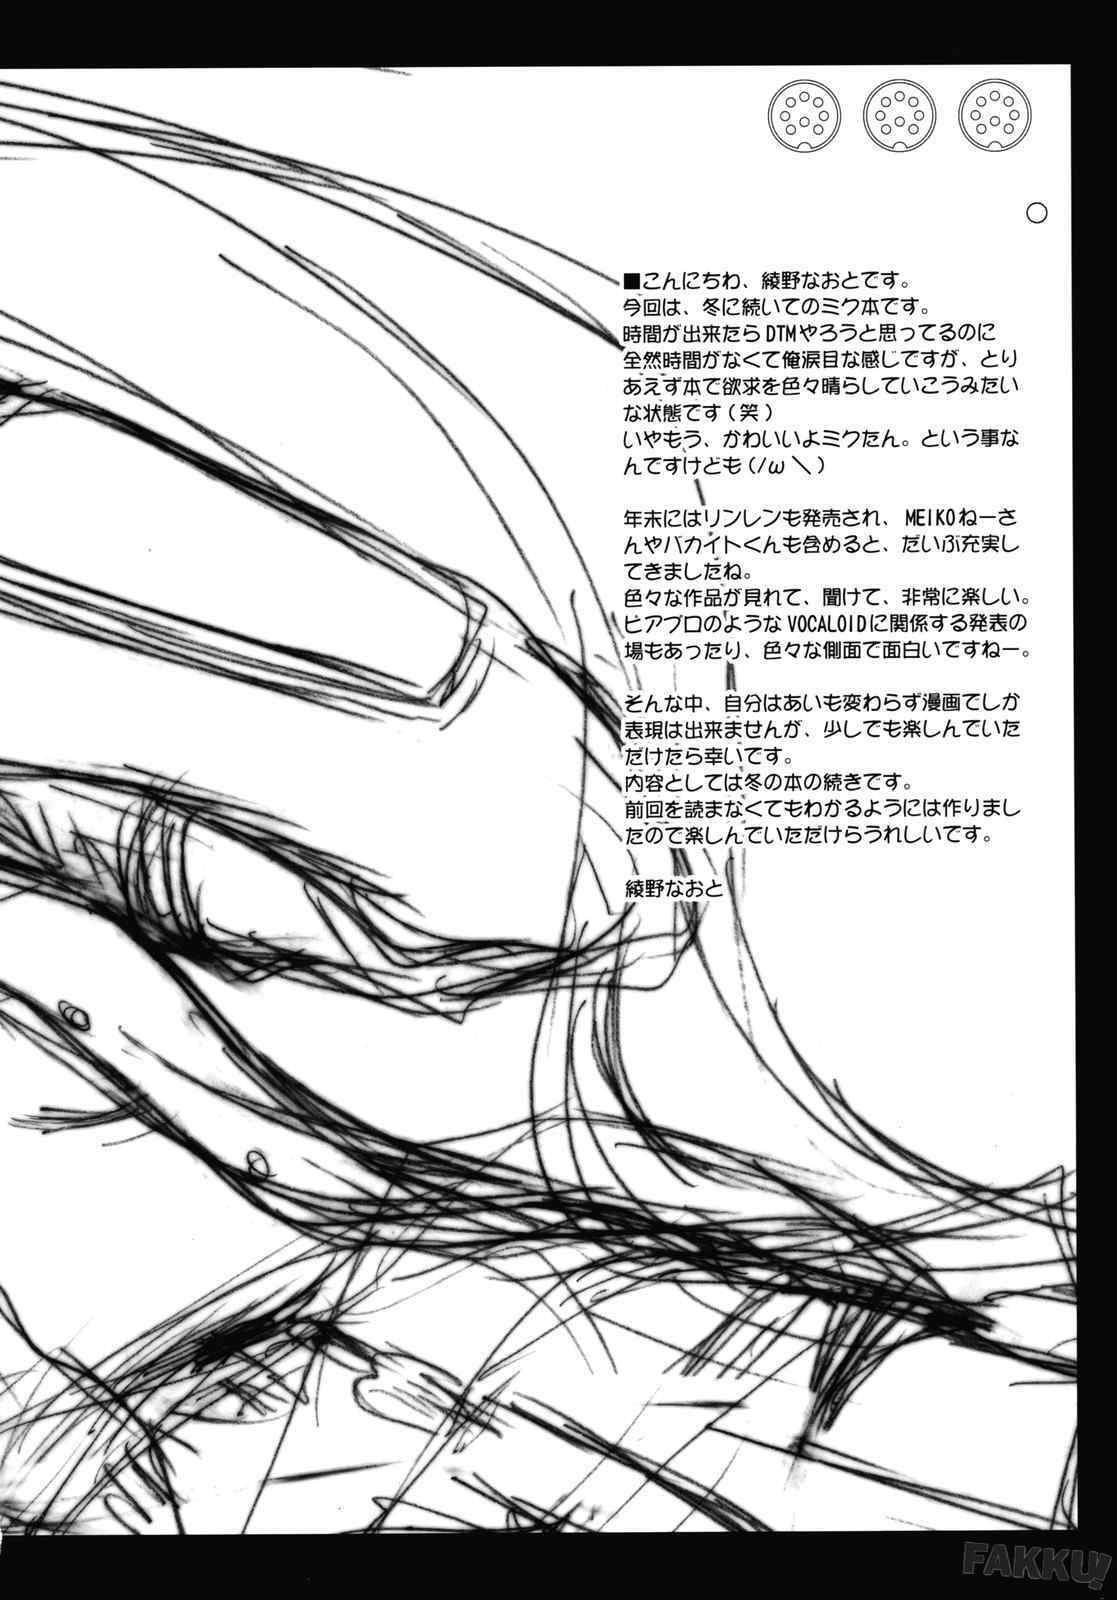 (SC38) [Kaiki Nisshoku (Ayano Naoto)] SEQUENCE (Vocaloid) [Chinese] page 2 full